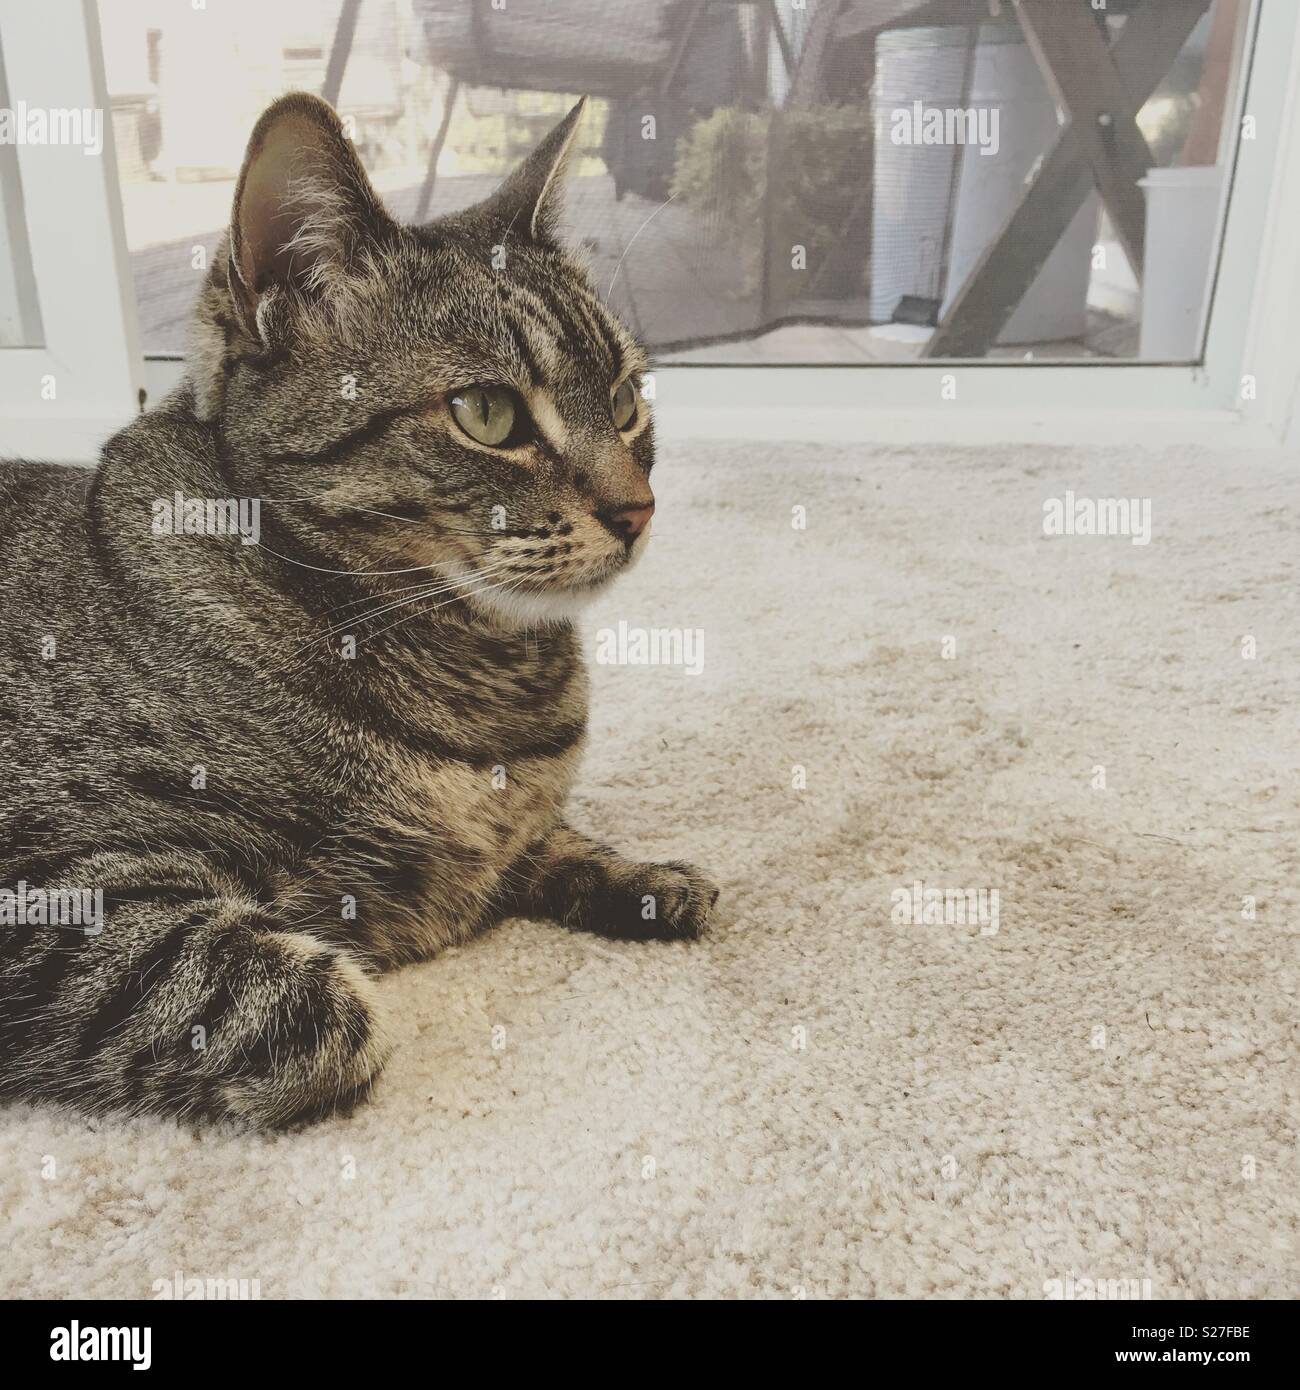 A tabby cat resting on a rug. Stock Photo